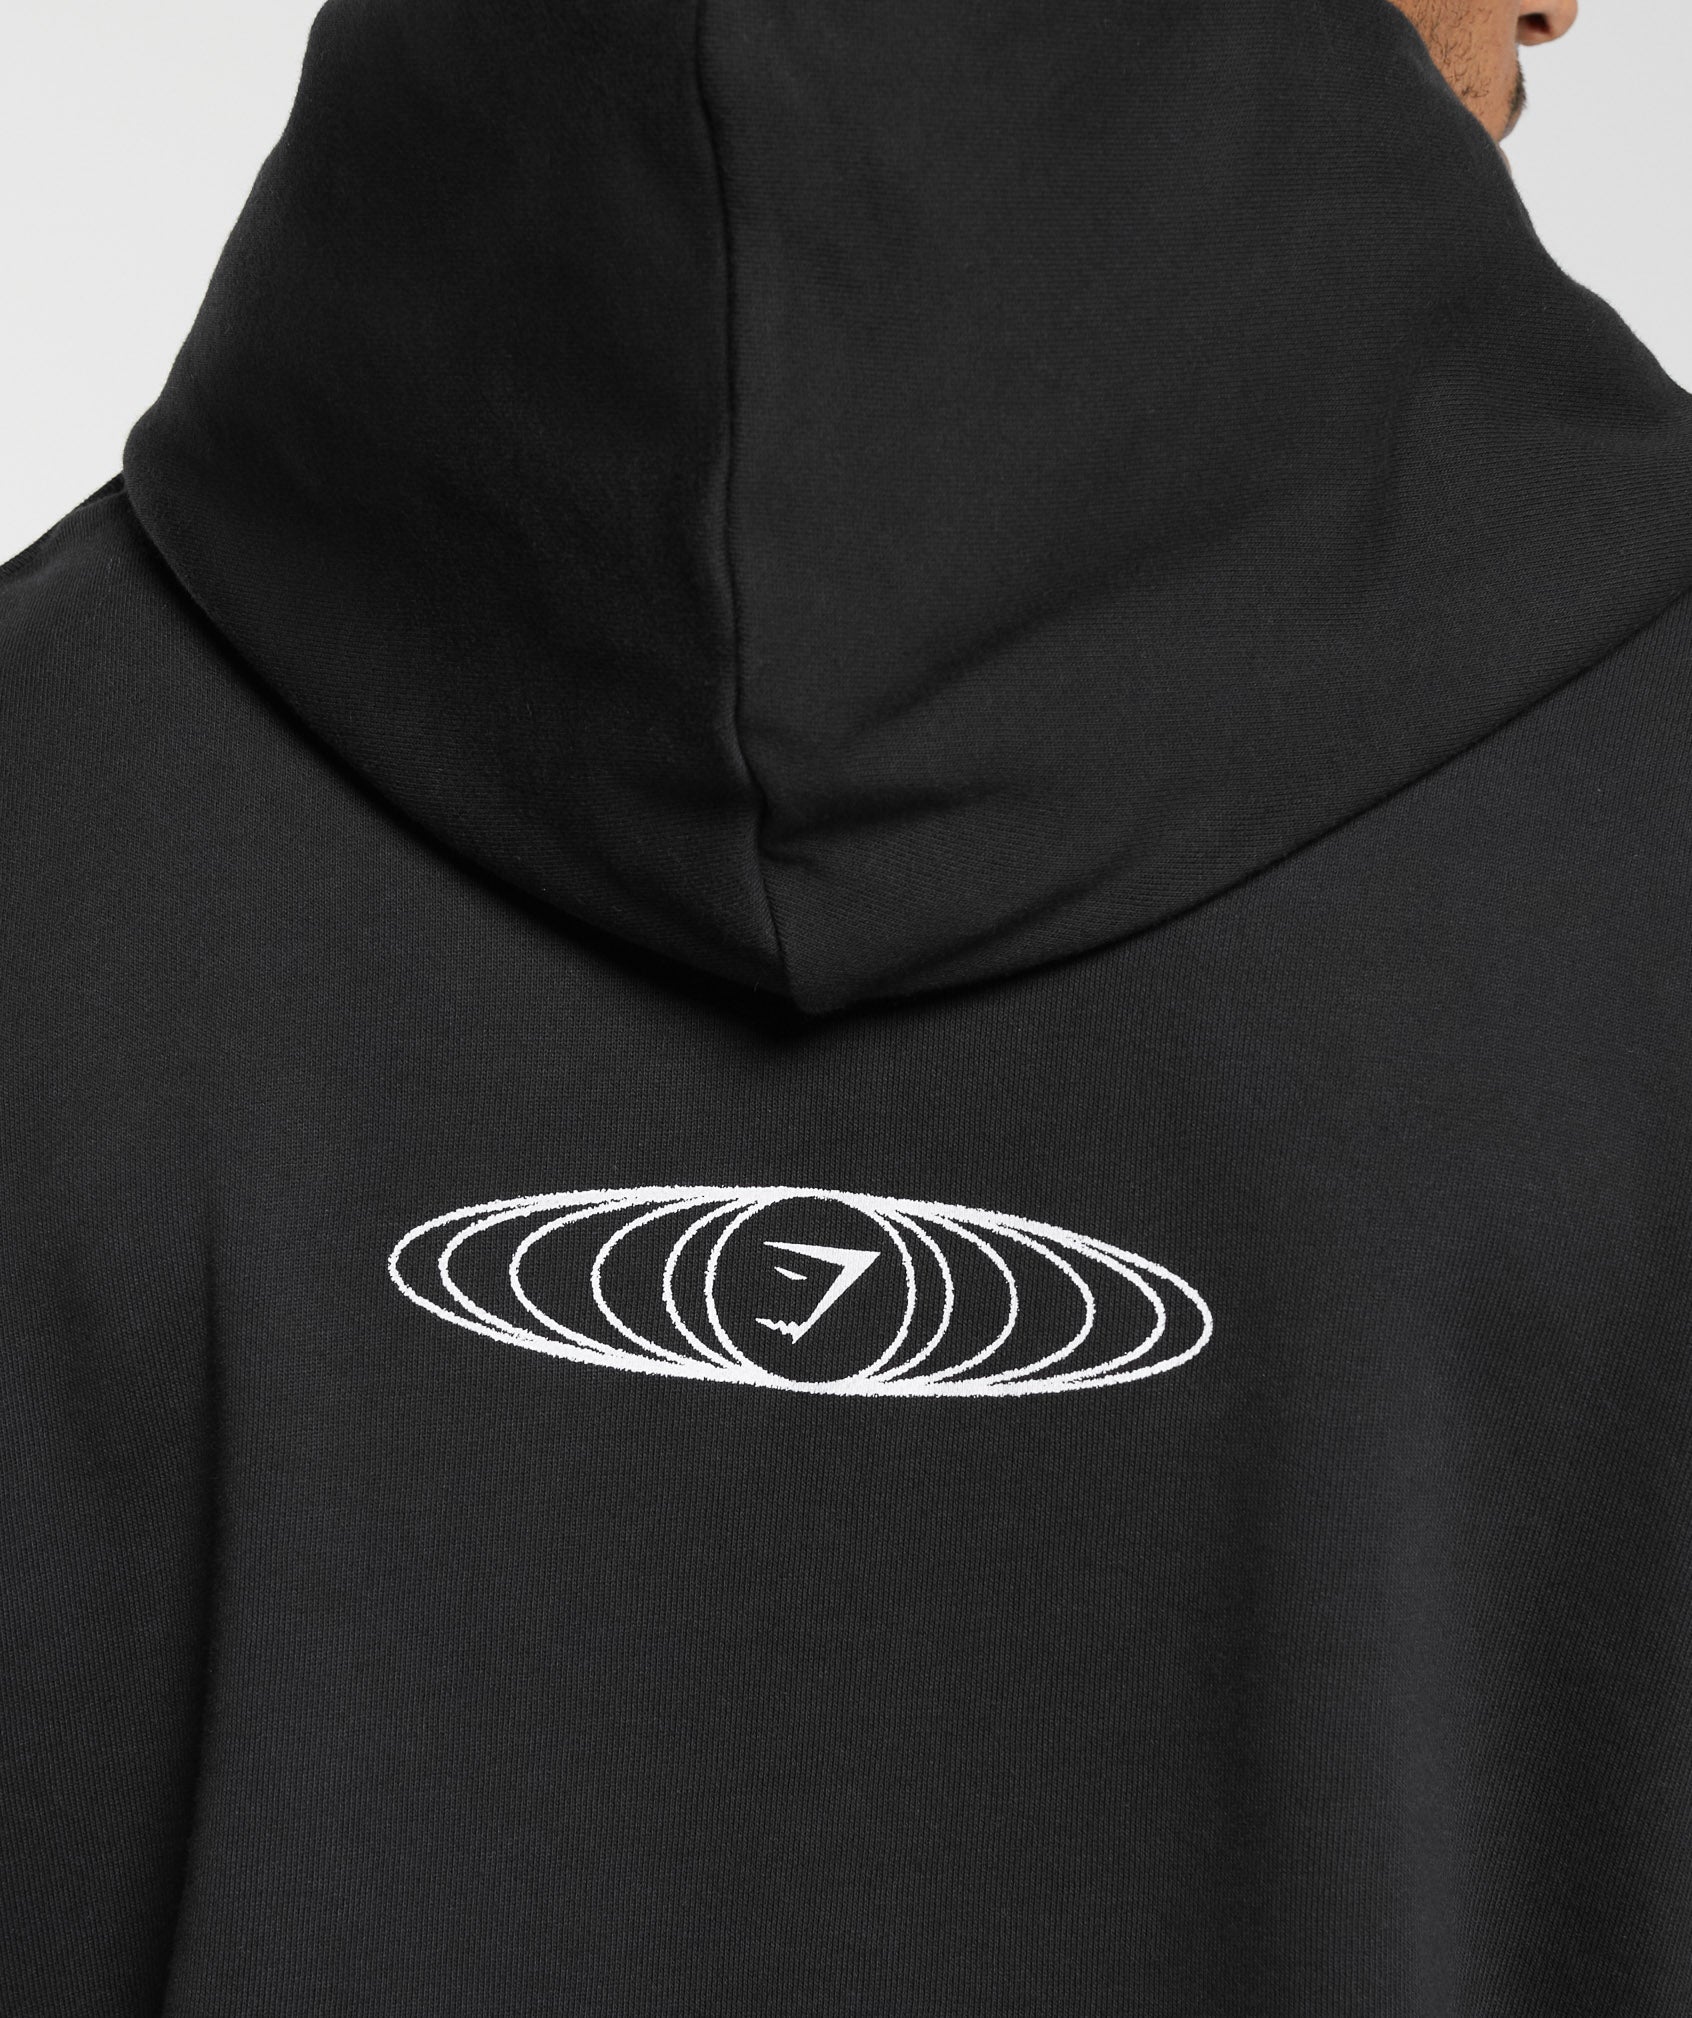 Masters of Our Craft Hoodie in Black - view 5